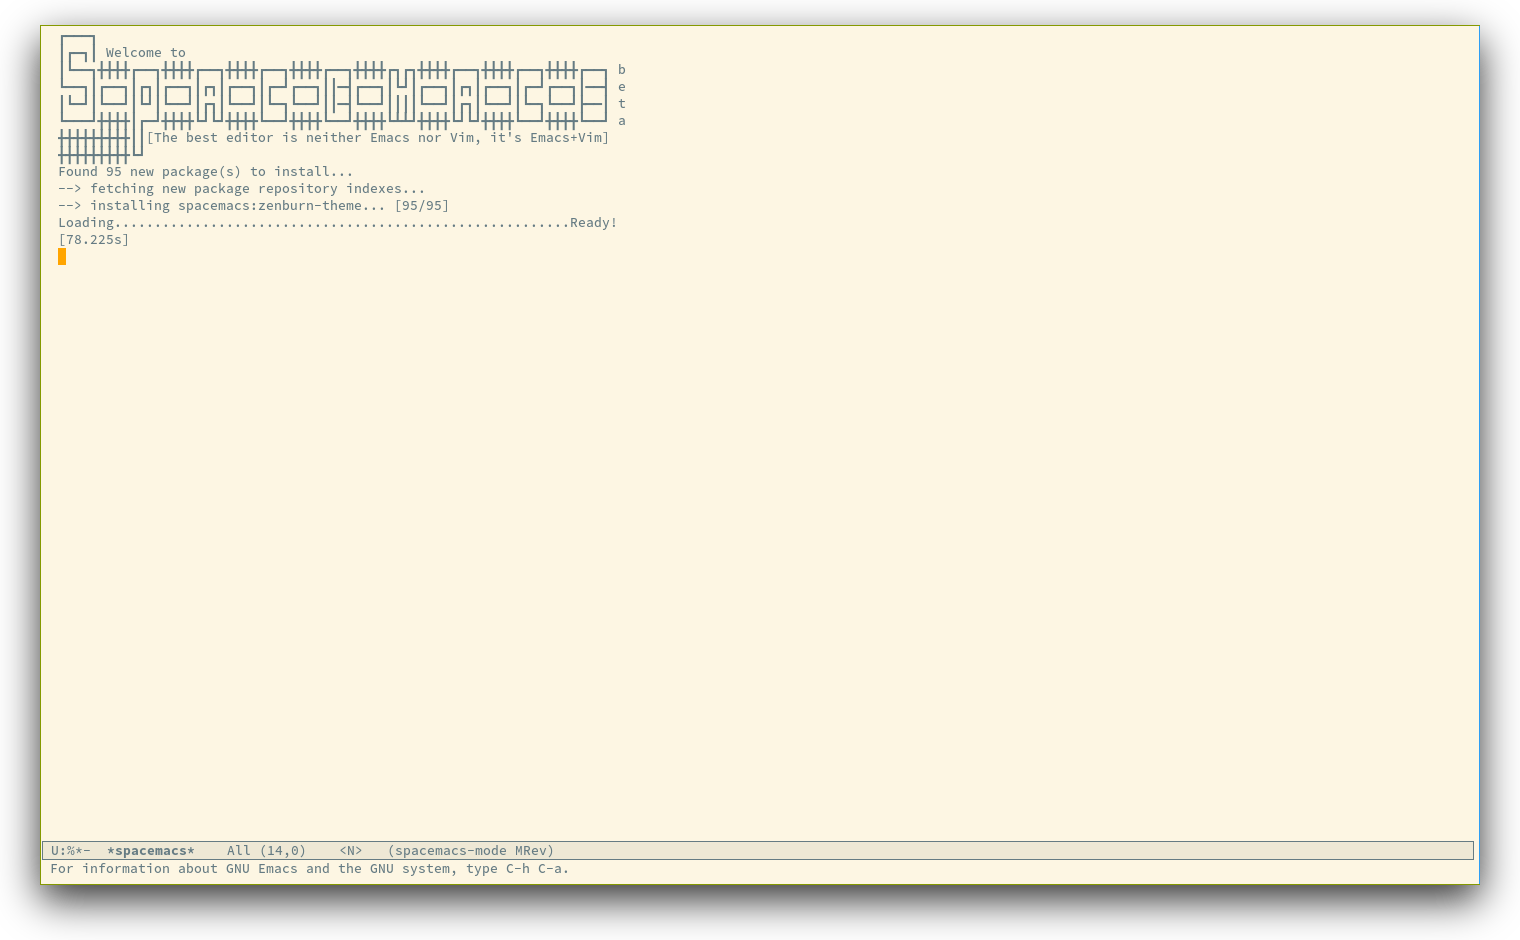 /TakeV/spacemacs/media/commit/b76ce3c311e67e5f19dce66a6f51a7bd072420ac/doc/img/spacemacs-startup.png